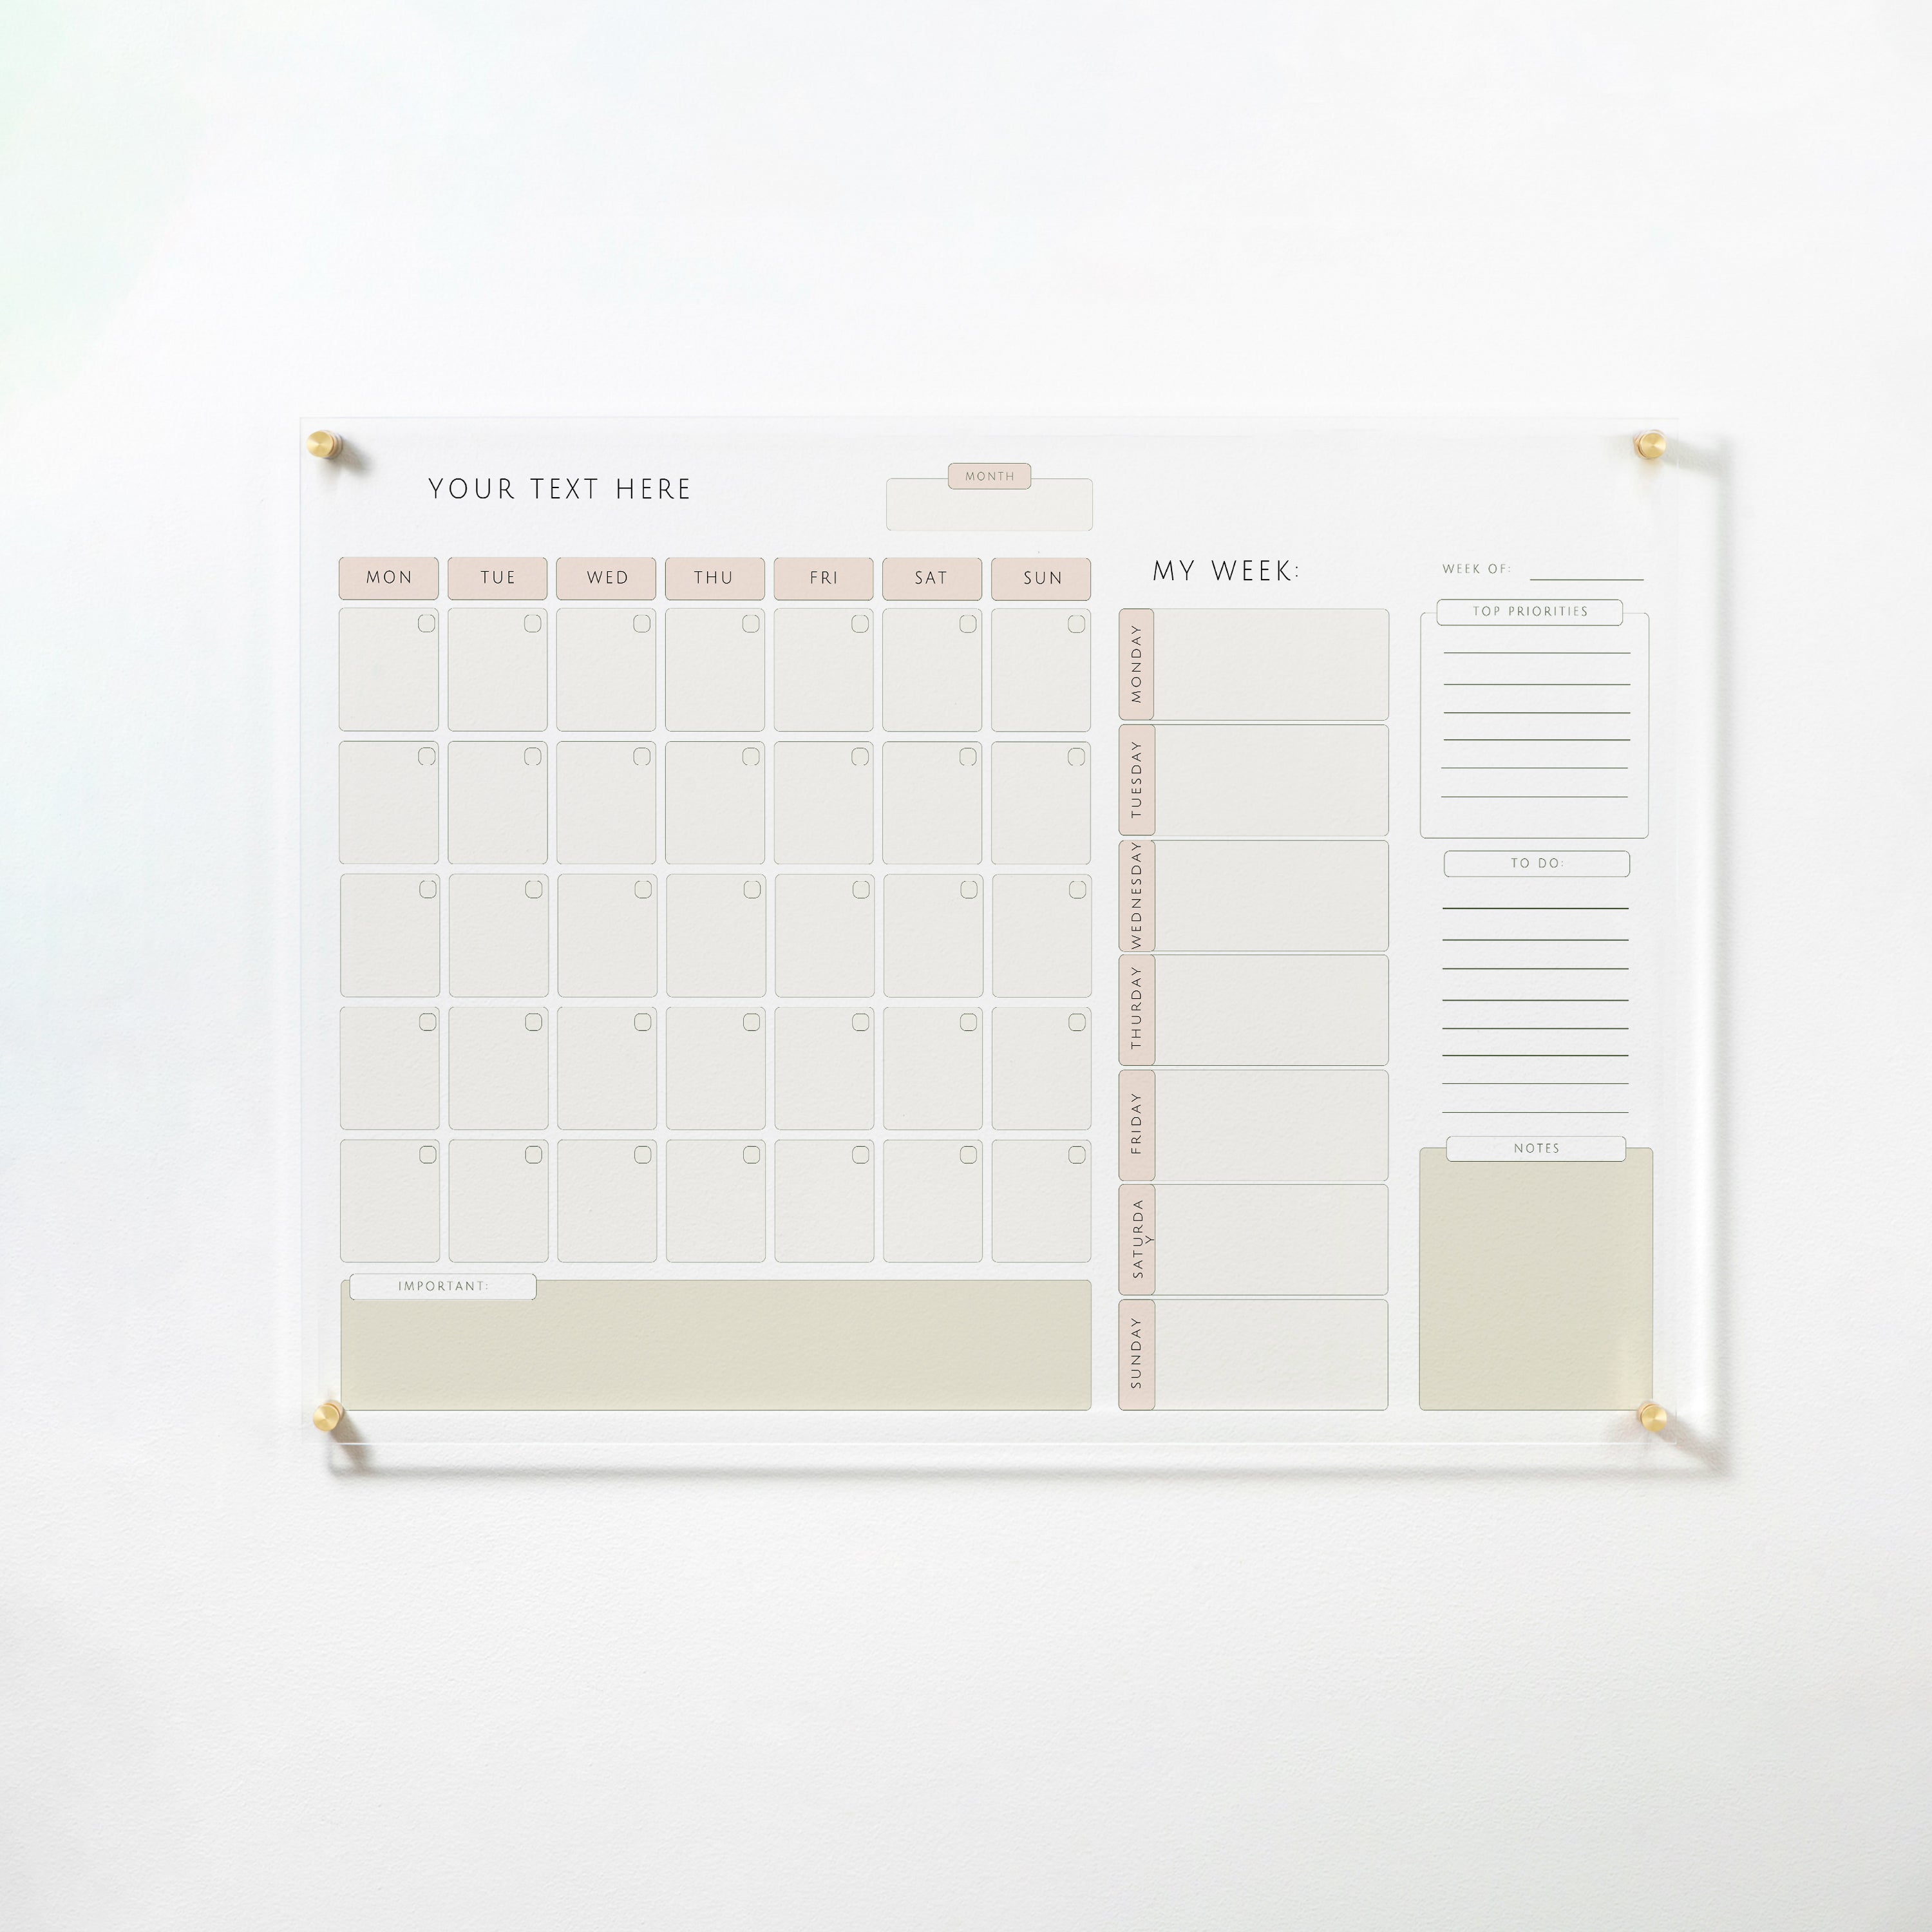 The "Custom Weekly Monthly Planner - Neutral" dry erase acrylic board mounted on a wall with gold pins. It features a monthly calendar grid, sections for weekly planning, top priorities, to-dos, and notes. The board's neutral tones and minimalist design offer an elegant and functional planning tool.